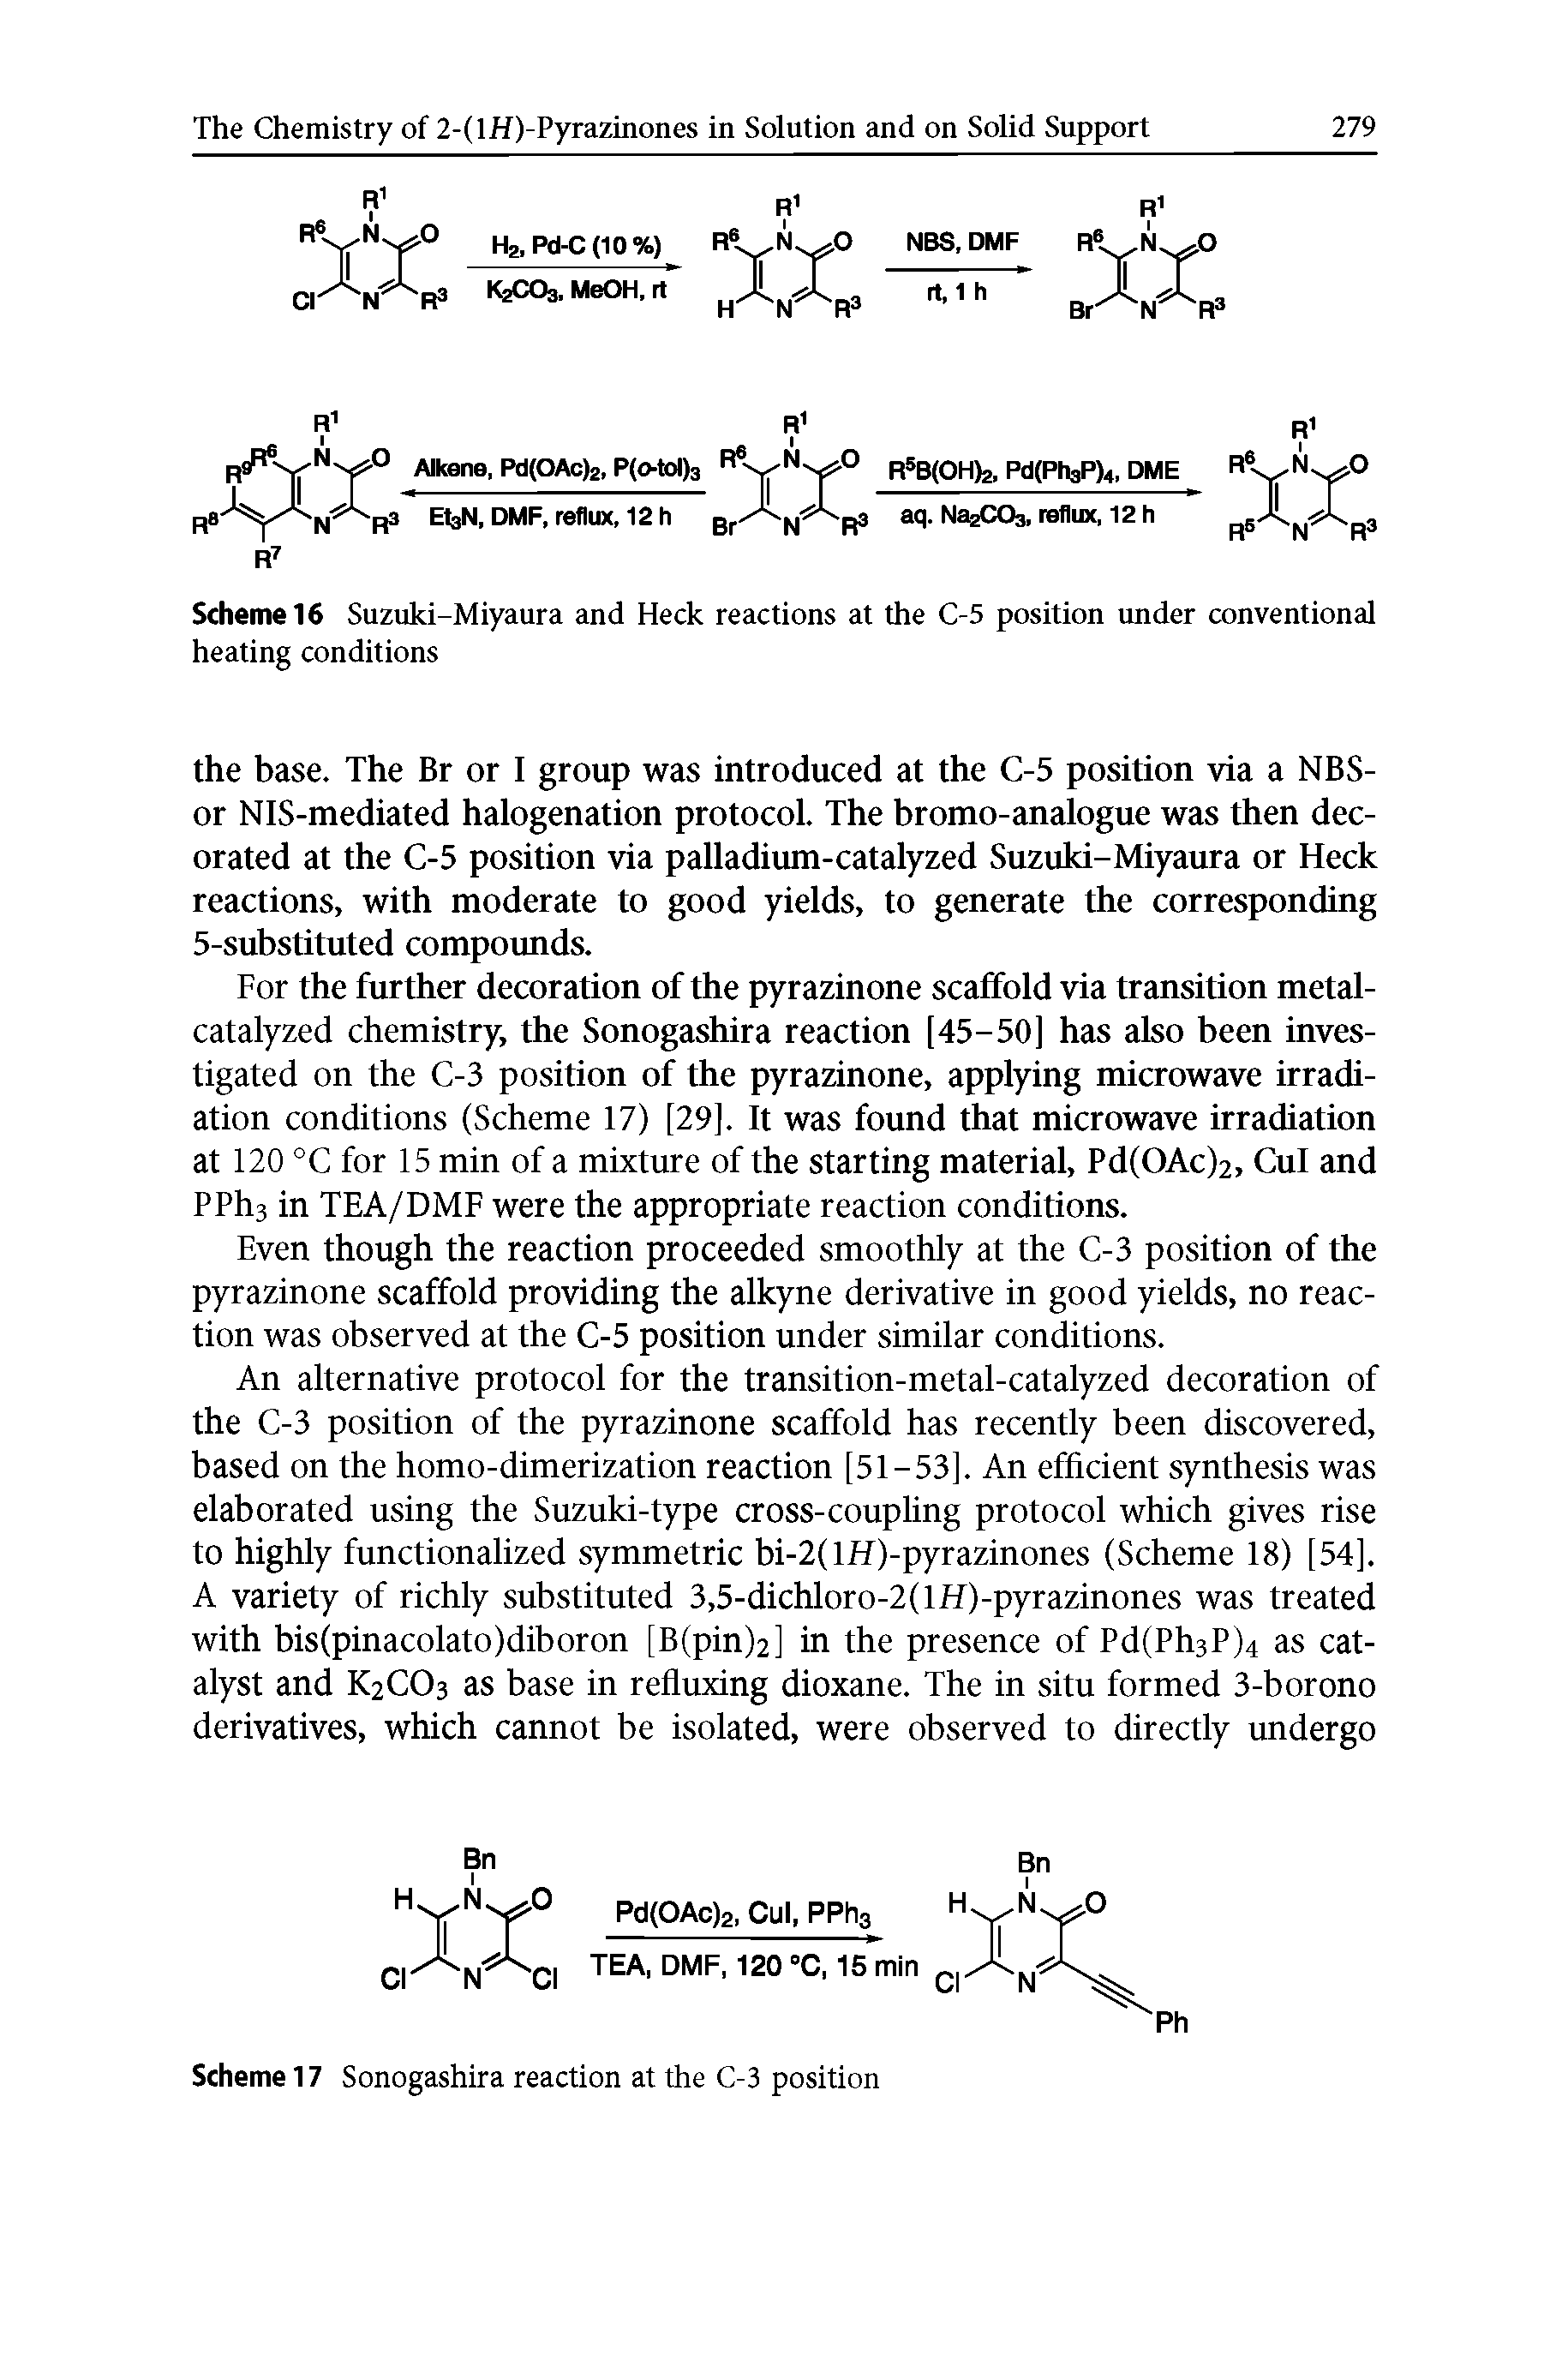 Scheme 16 Suzuki-Miyaura and Heck reactions at the C-5 position under conventional heating conditions...